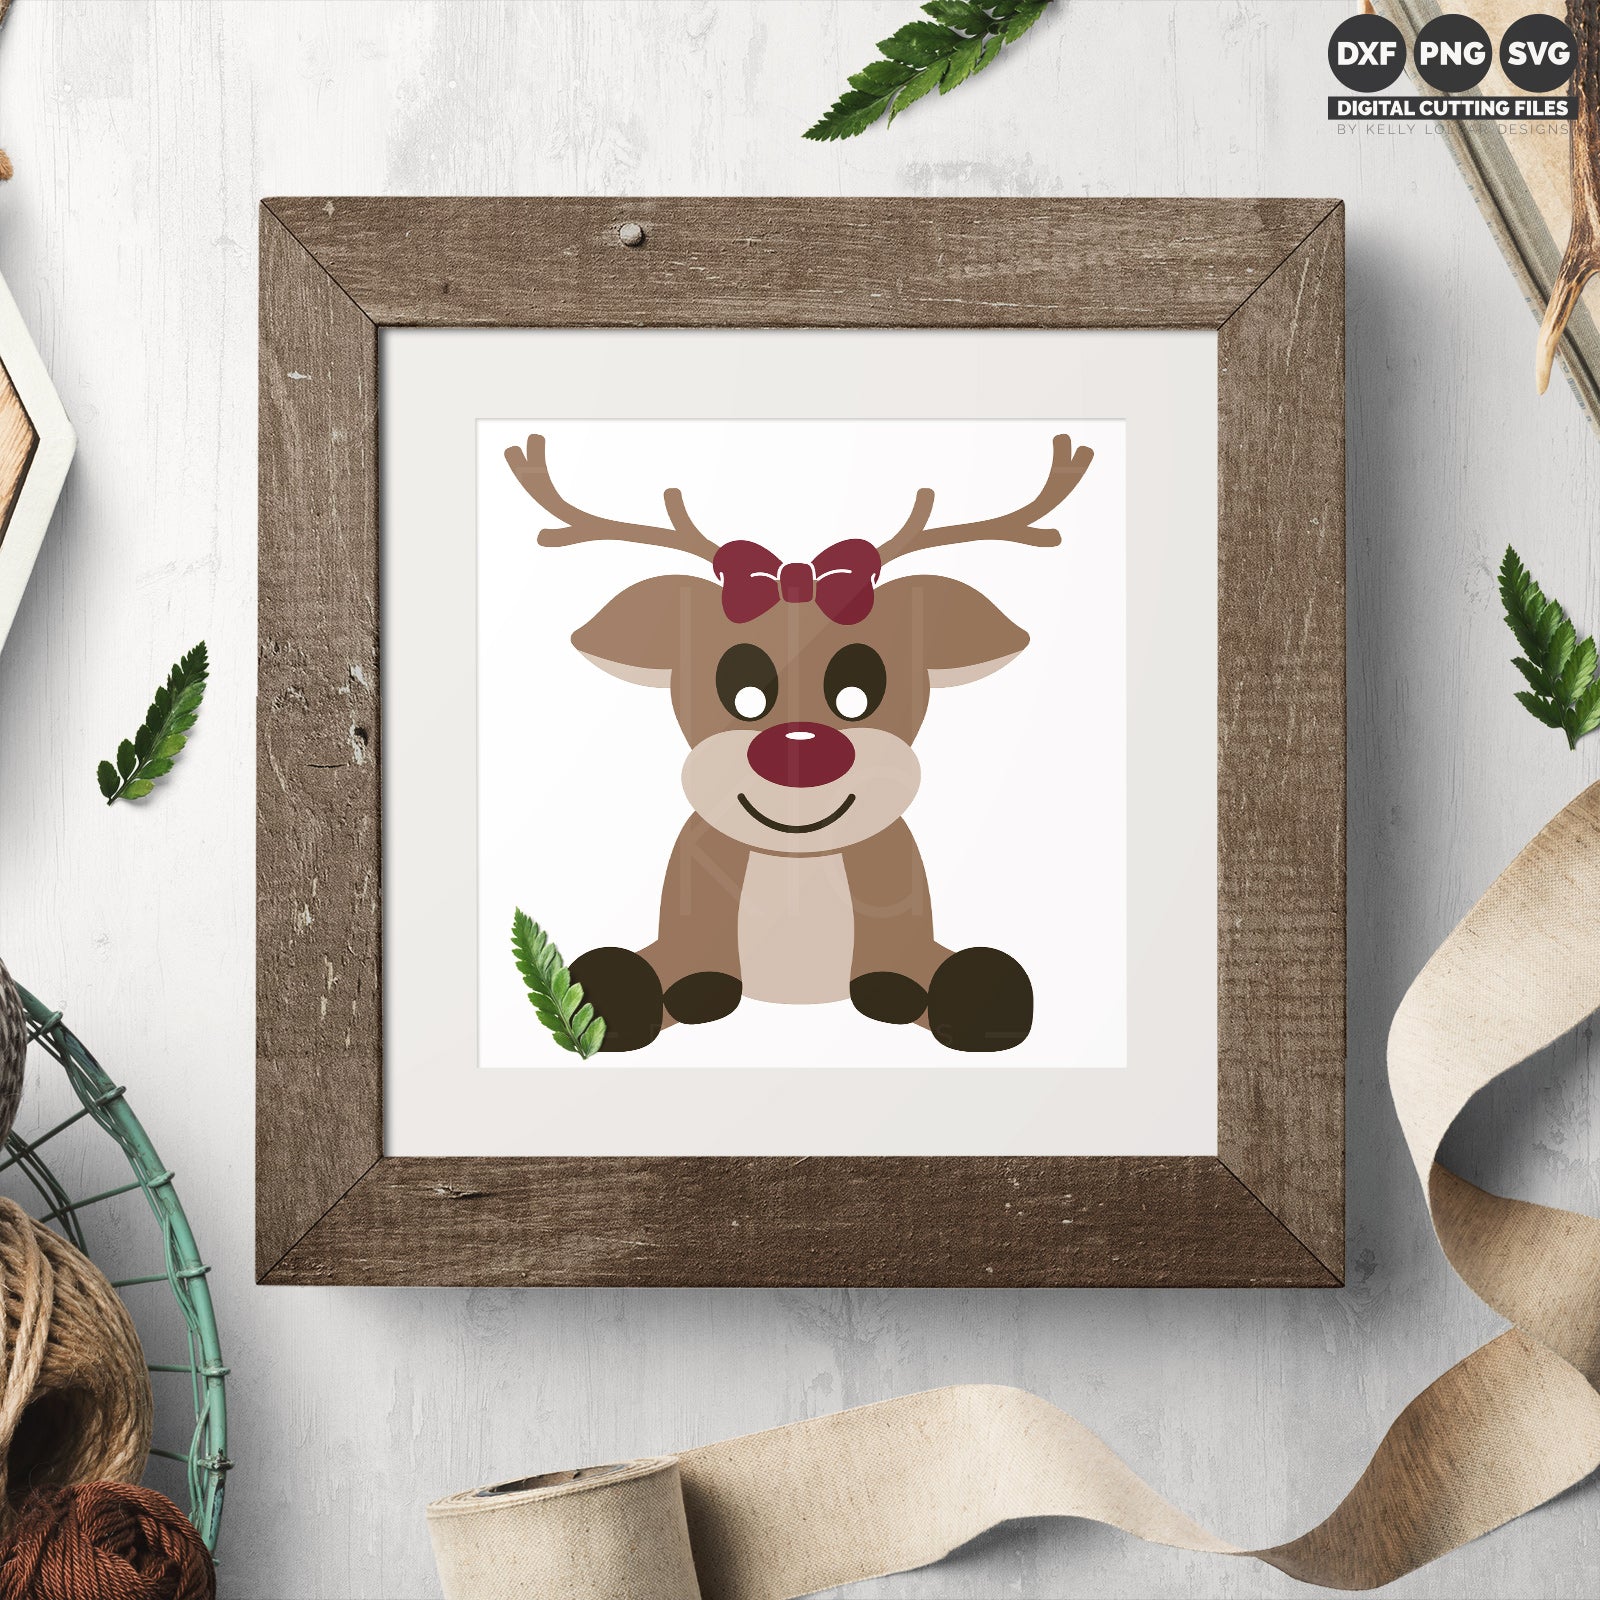 Freebie Friday SVG - Set of boy and girl Reindeer svg files in a sitting position with over sized features and a cute bow for the girl